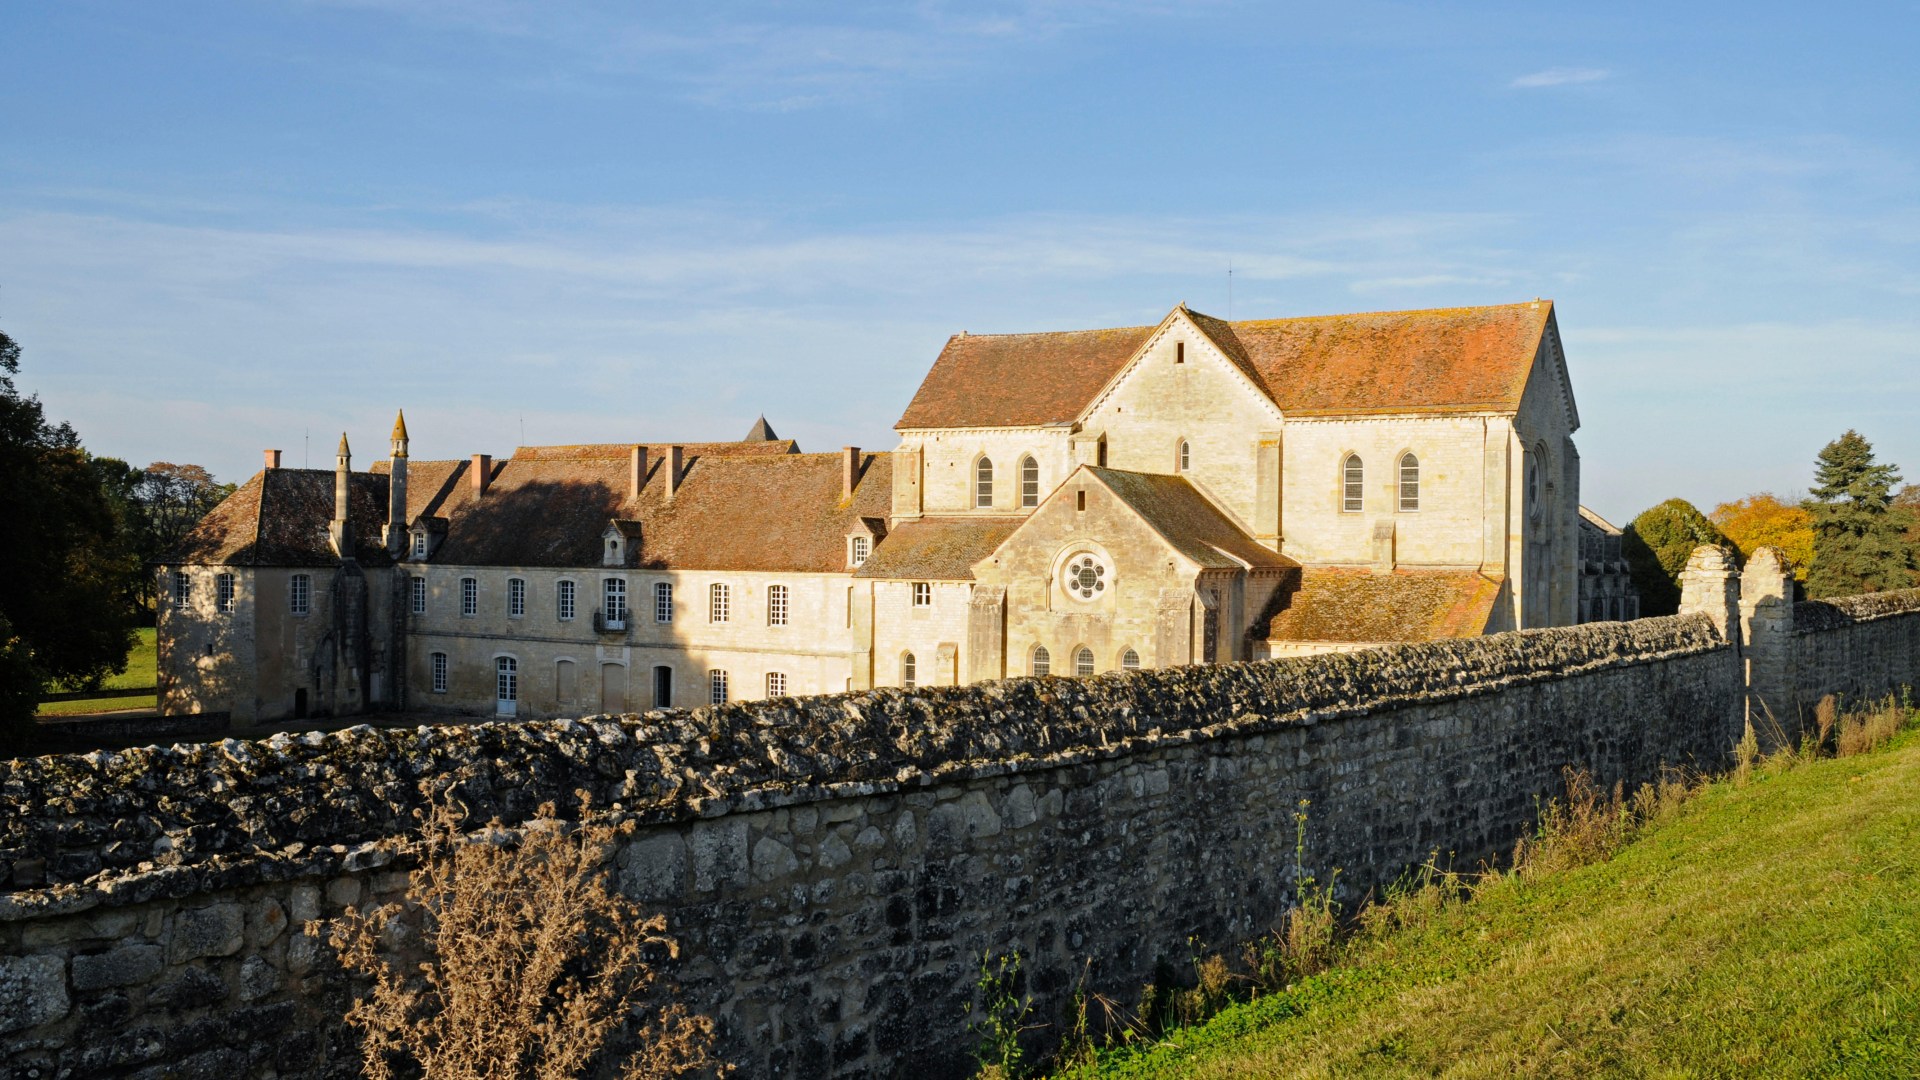 Incredible Opportunity: Town in France Selling House for €1 – Act Fast to Secure Your Dream Home